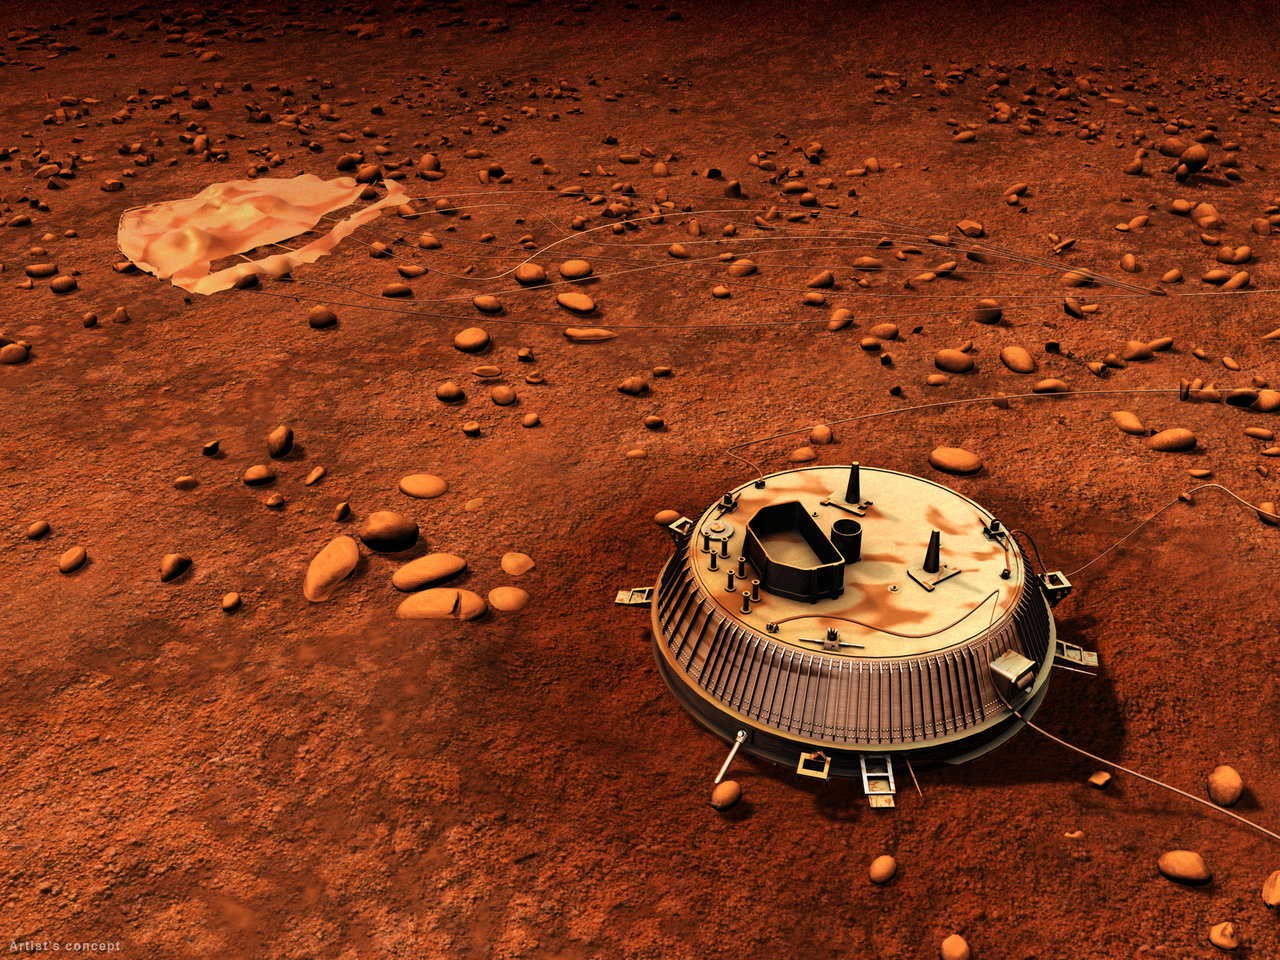 Lying on terrain of dark reddish-orange soil amid scattered rocks, a craft resembling the lid of a disposable coffee cup, but metal and nine feet wide, rests in the foreground. In the background, at upper left, lies its deflated parachute, and both are dusted in the native orange soil.